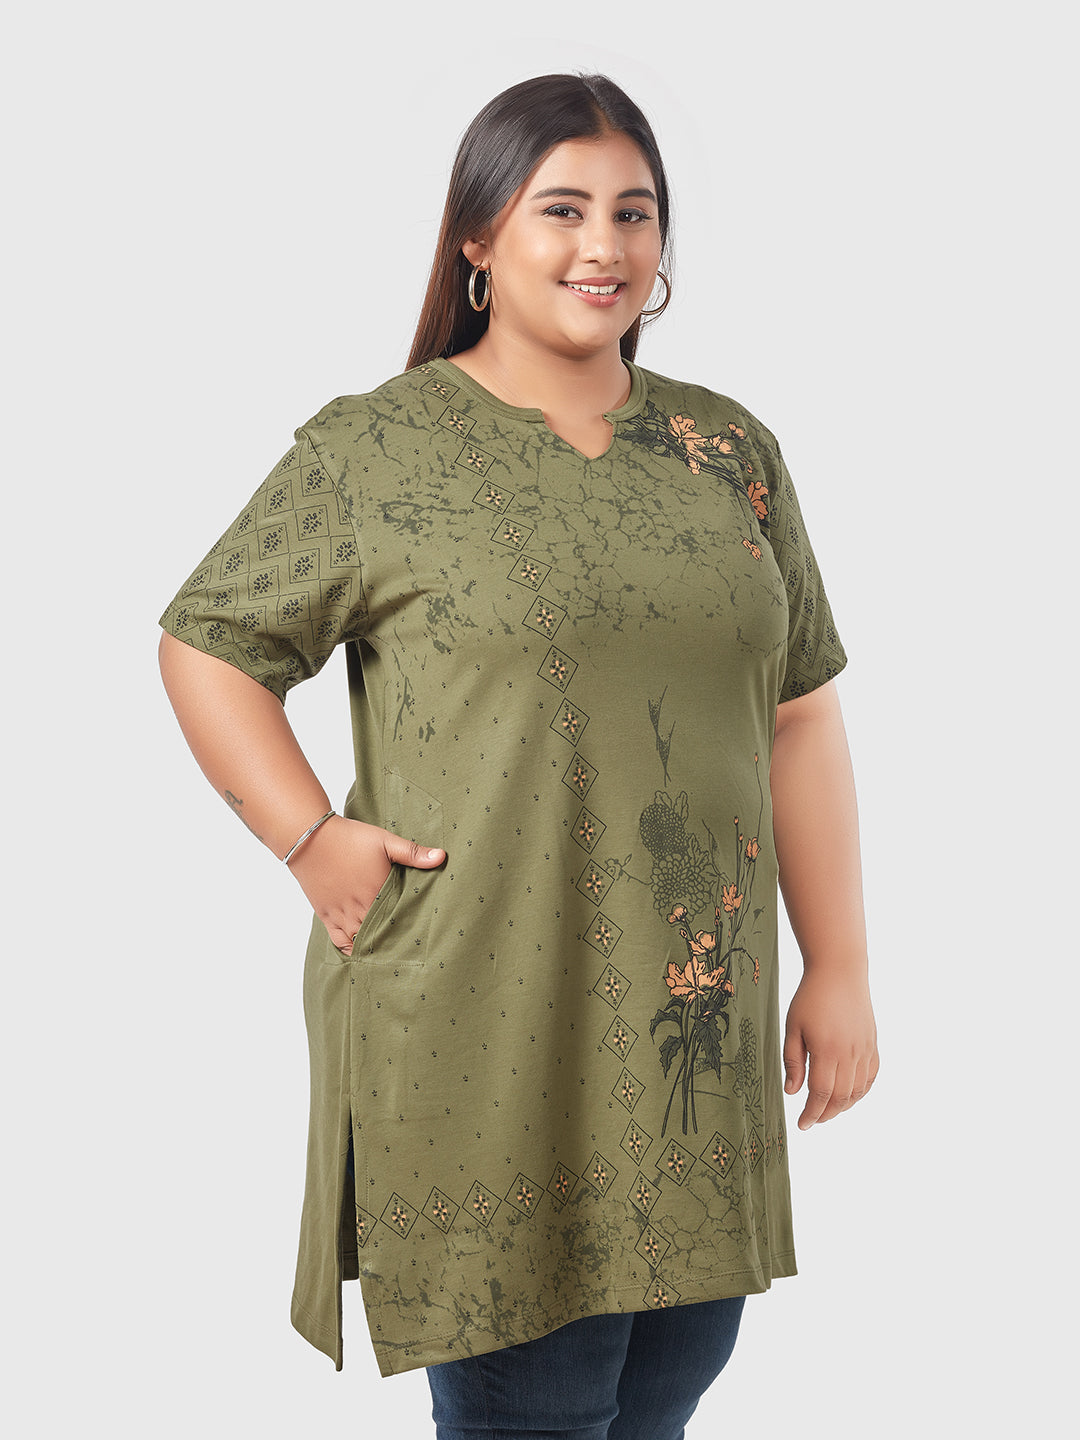 Stylish Printed Long Tops For Women in Half Sleeves - Plus Size -Olive Green AT Online 